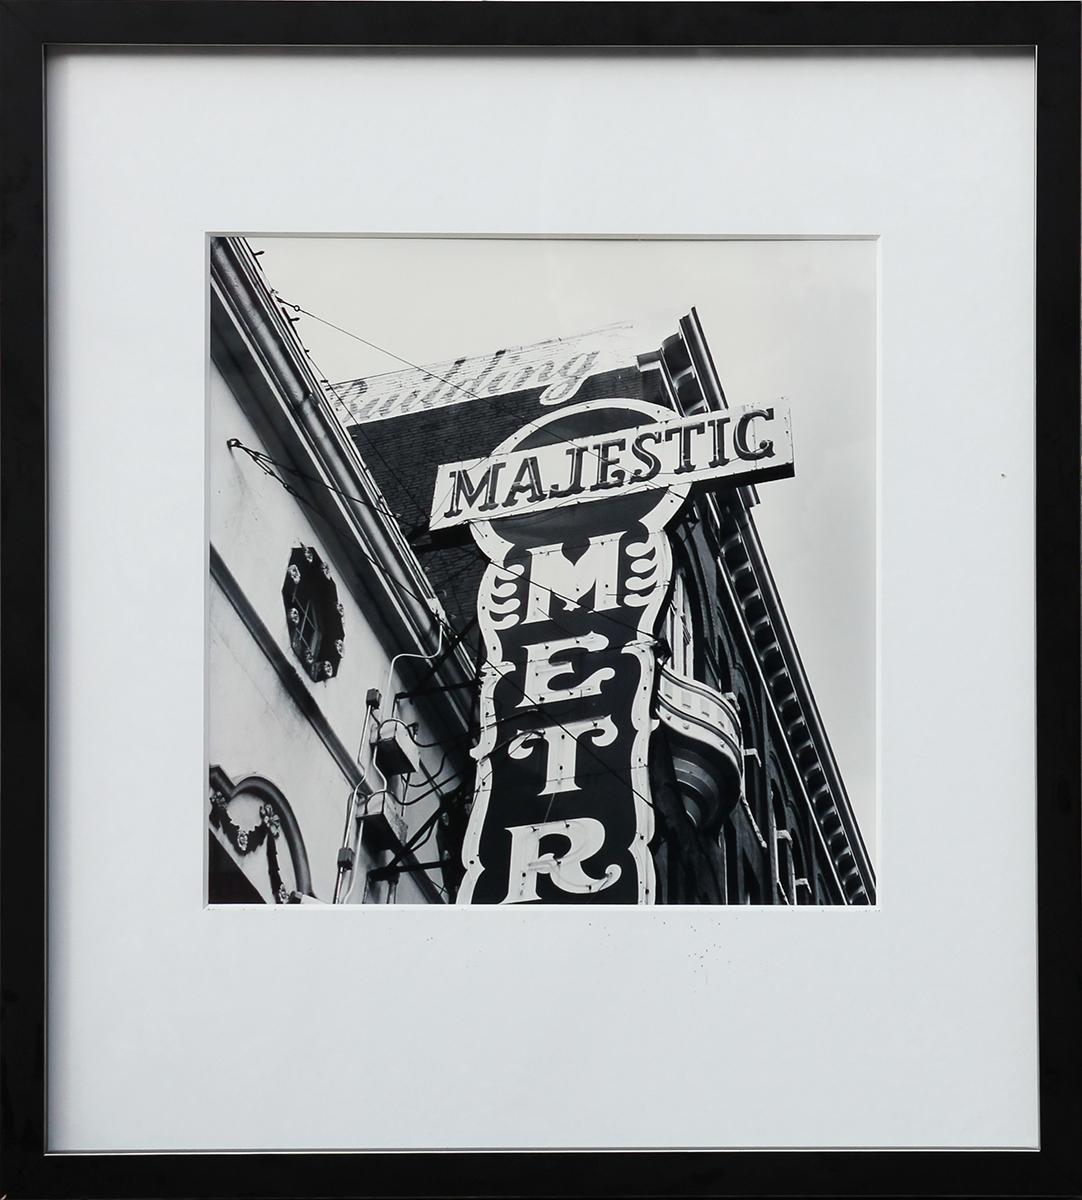 Bevin Bering Black and White Photograph - "Majestic Metro" Contemporary Black and White Texas Photograph